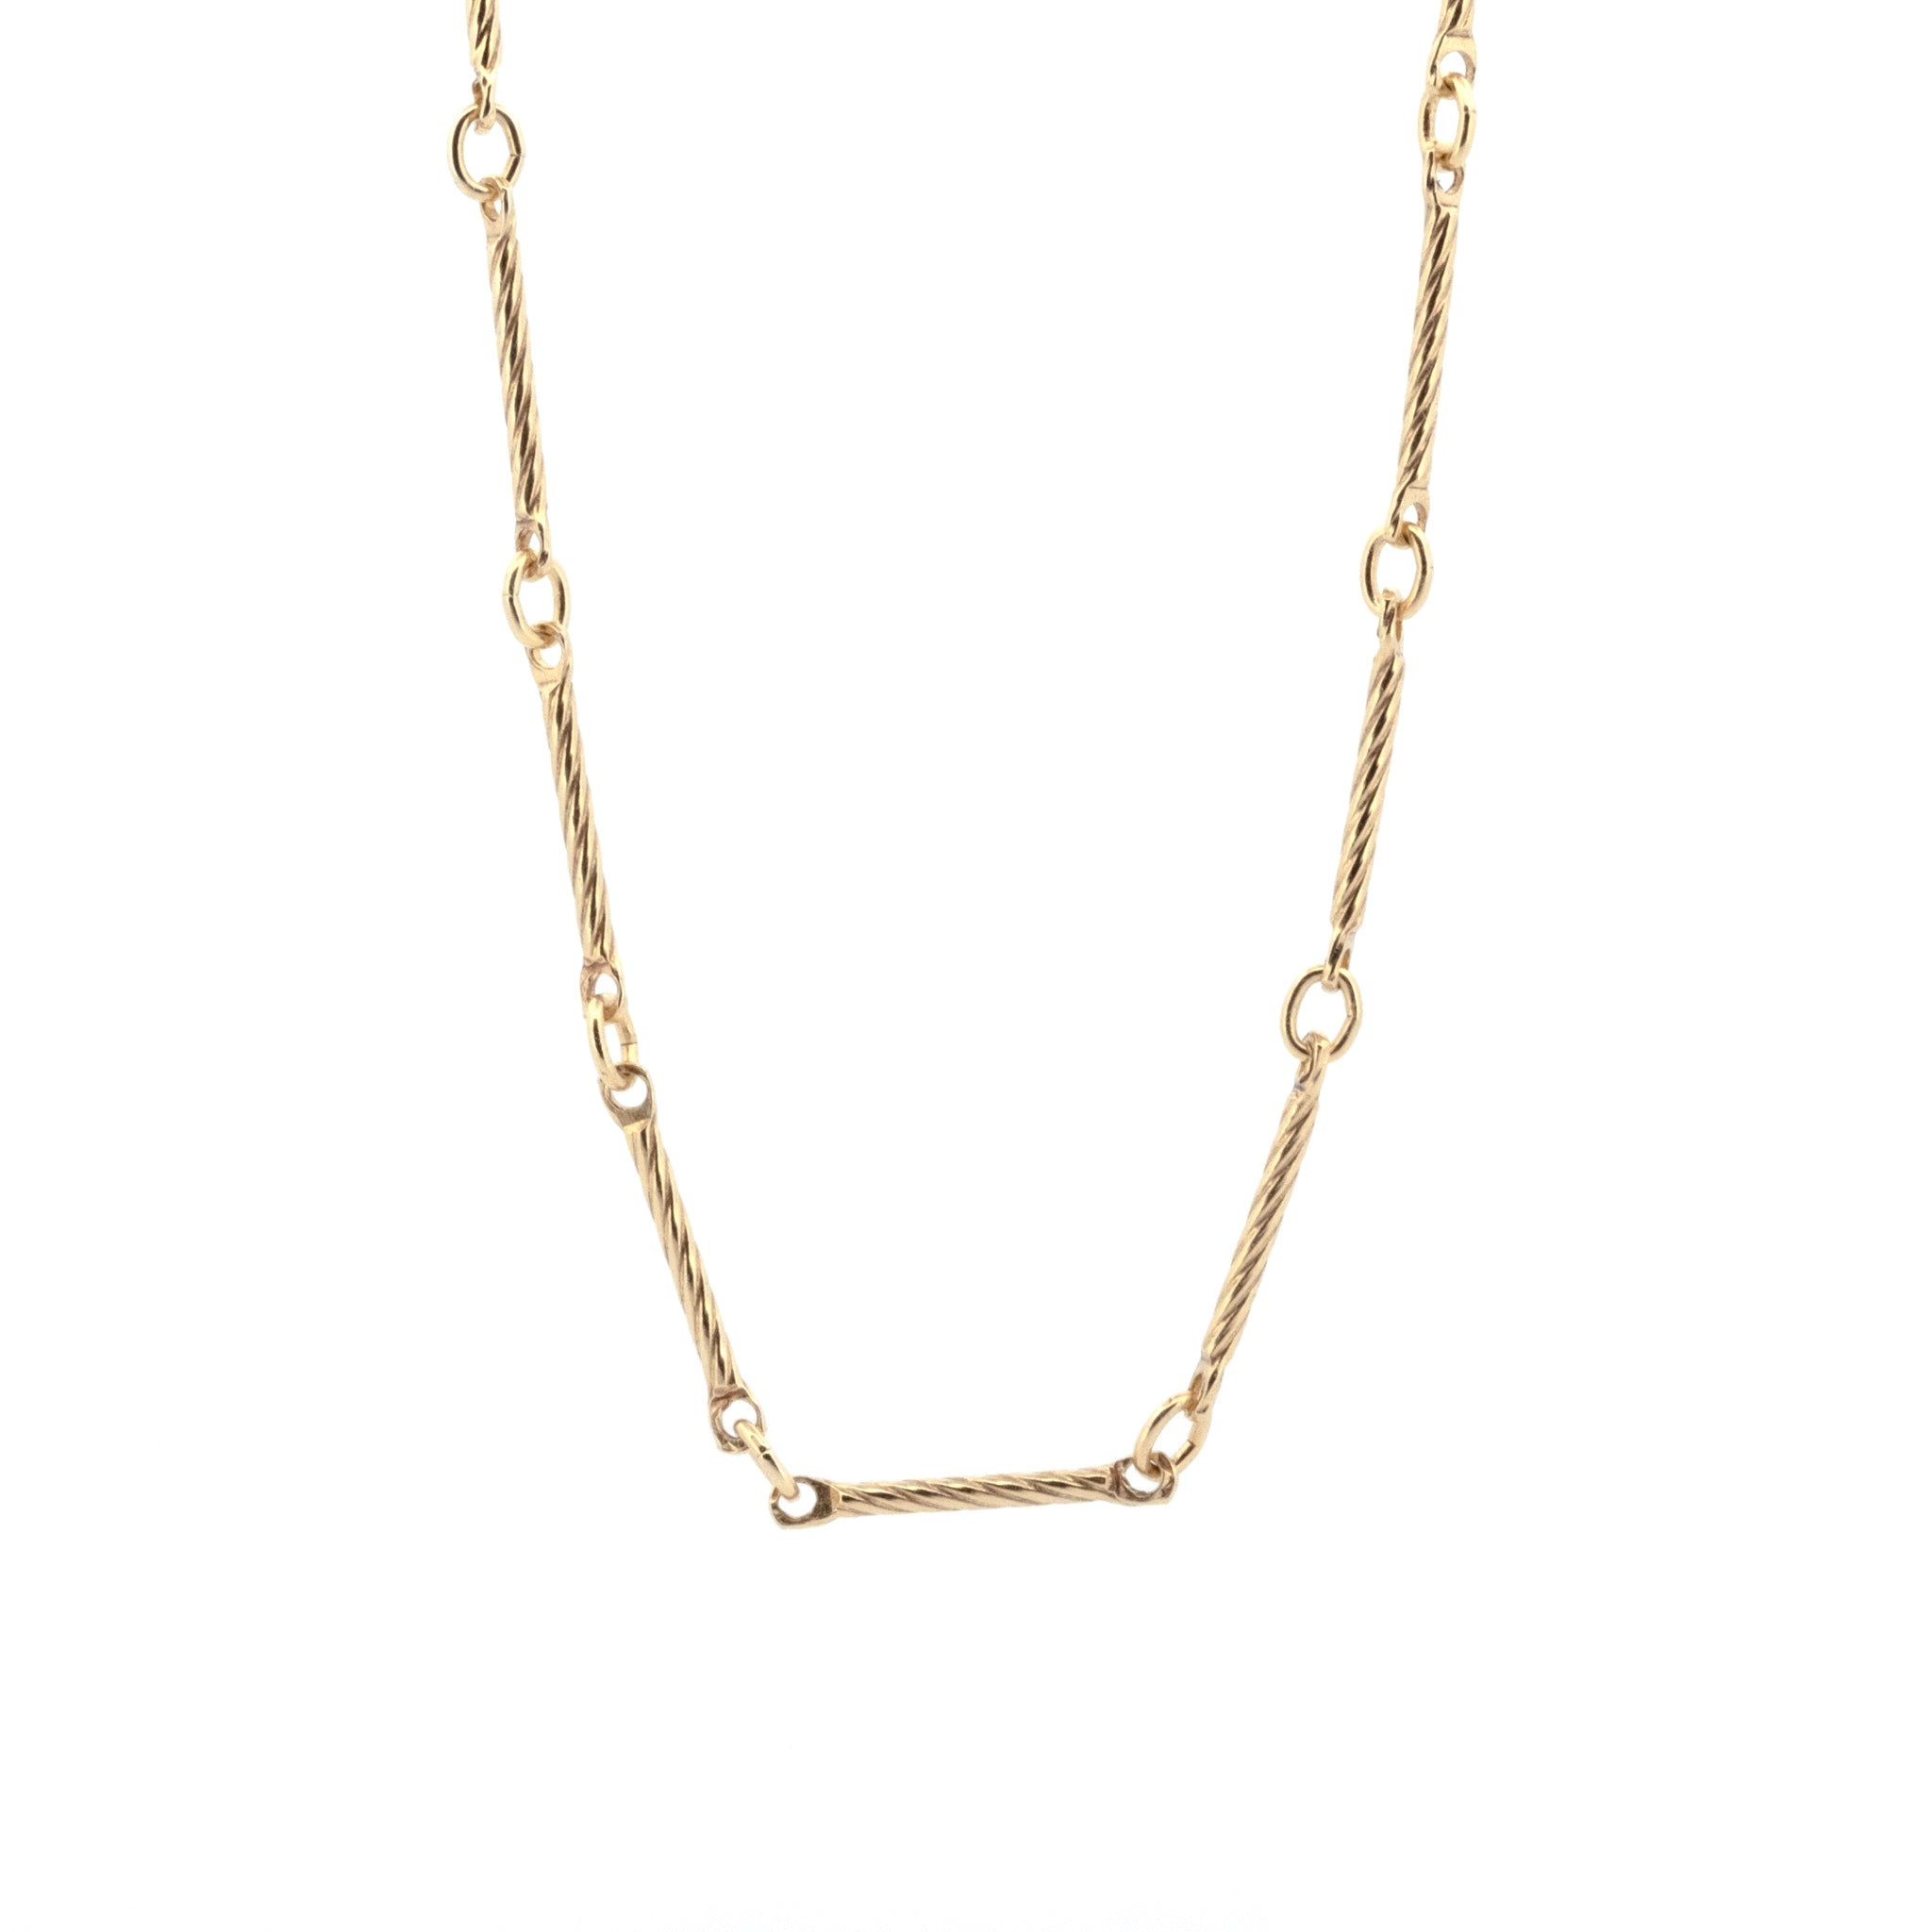 A solid 9k yellow gold Aiden Jae Banyan Bar Chain Necklace with twisted texture and links on a white background.